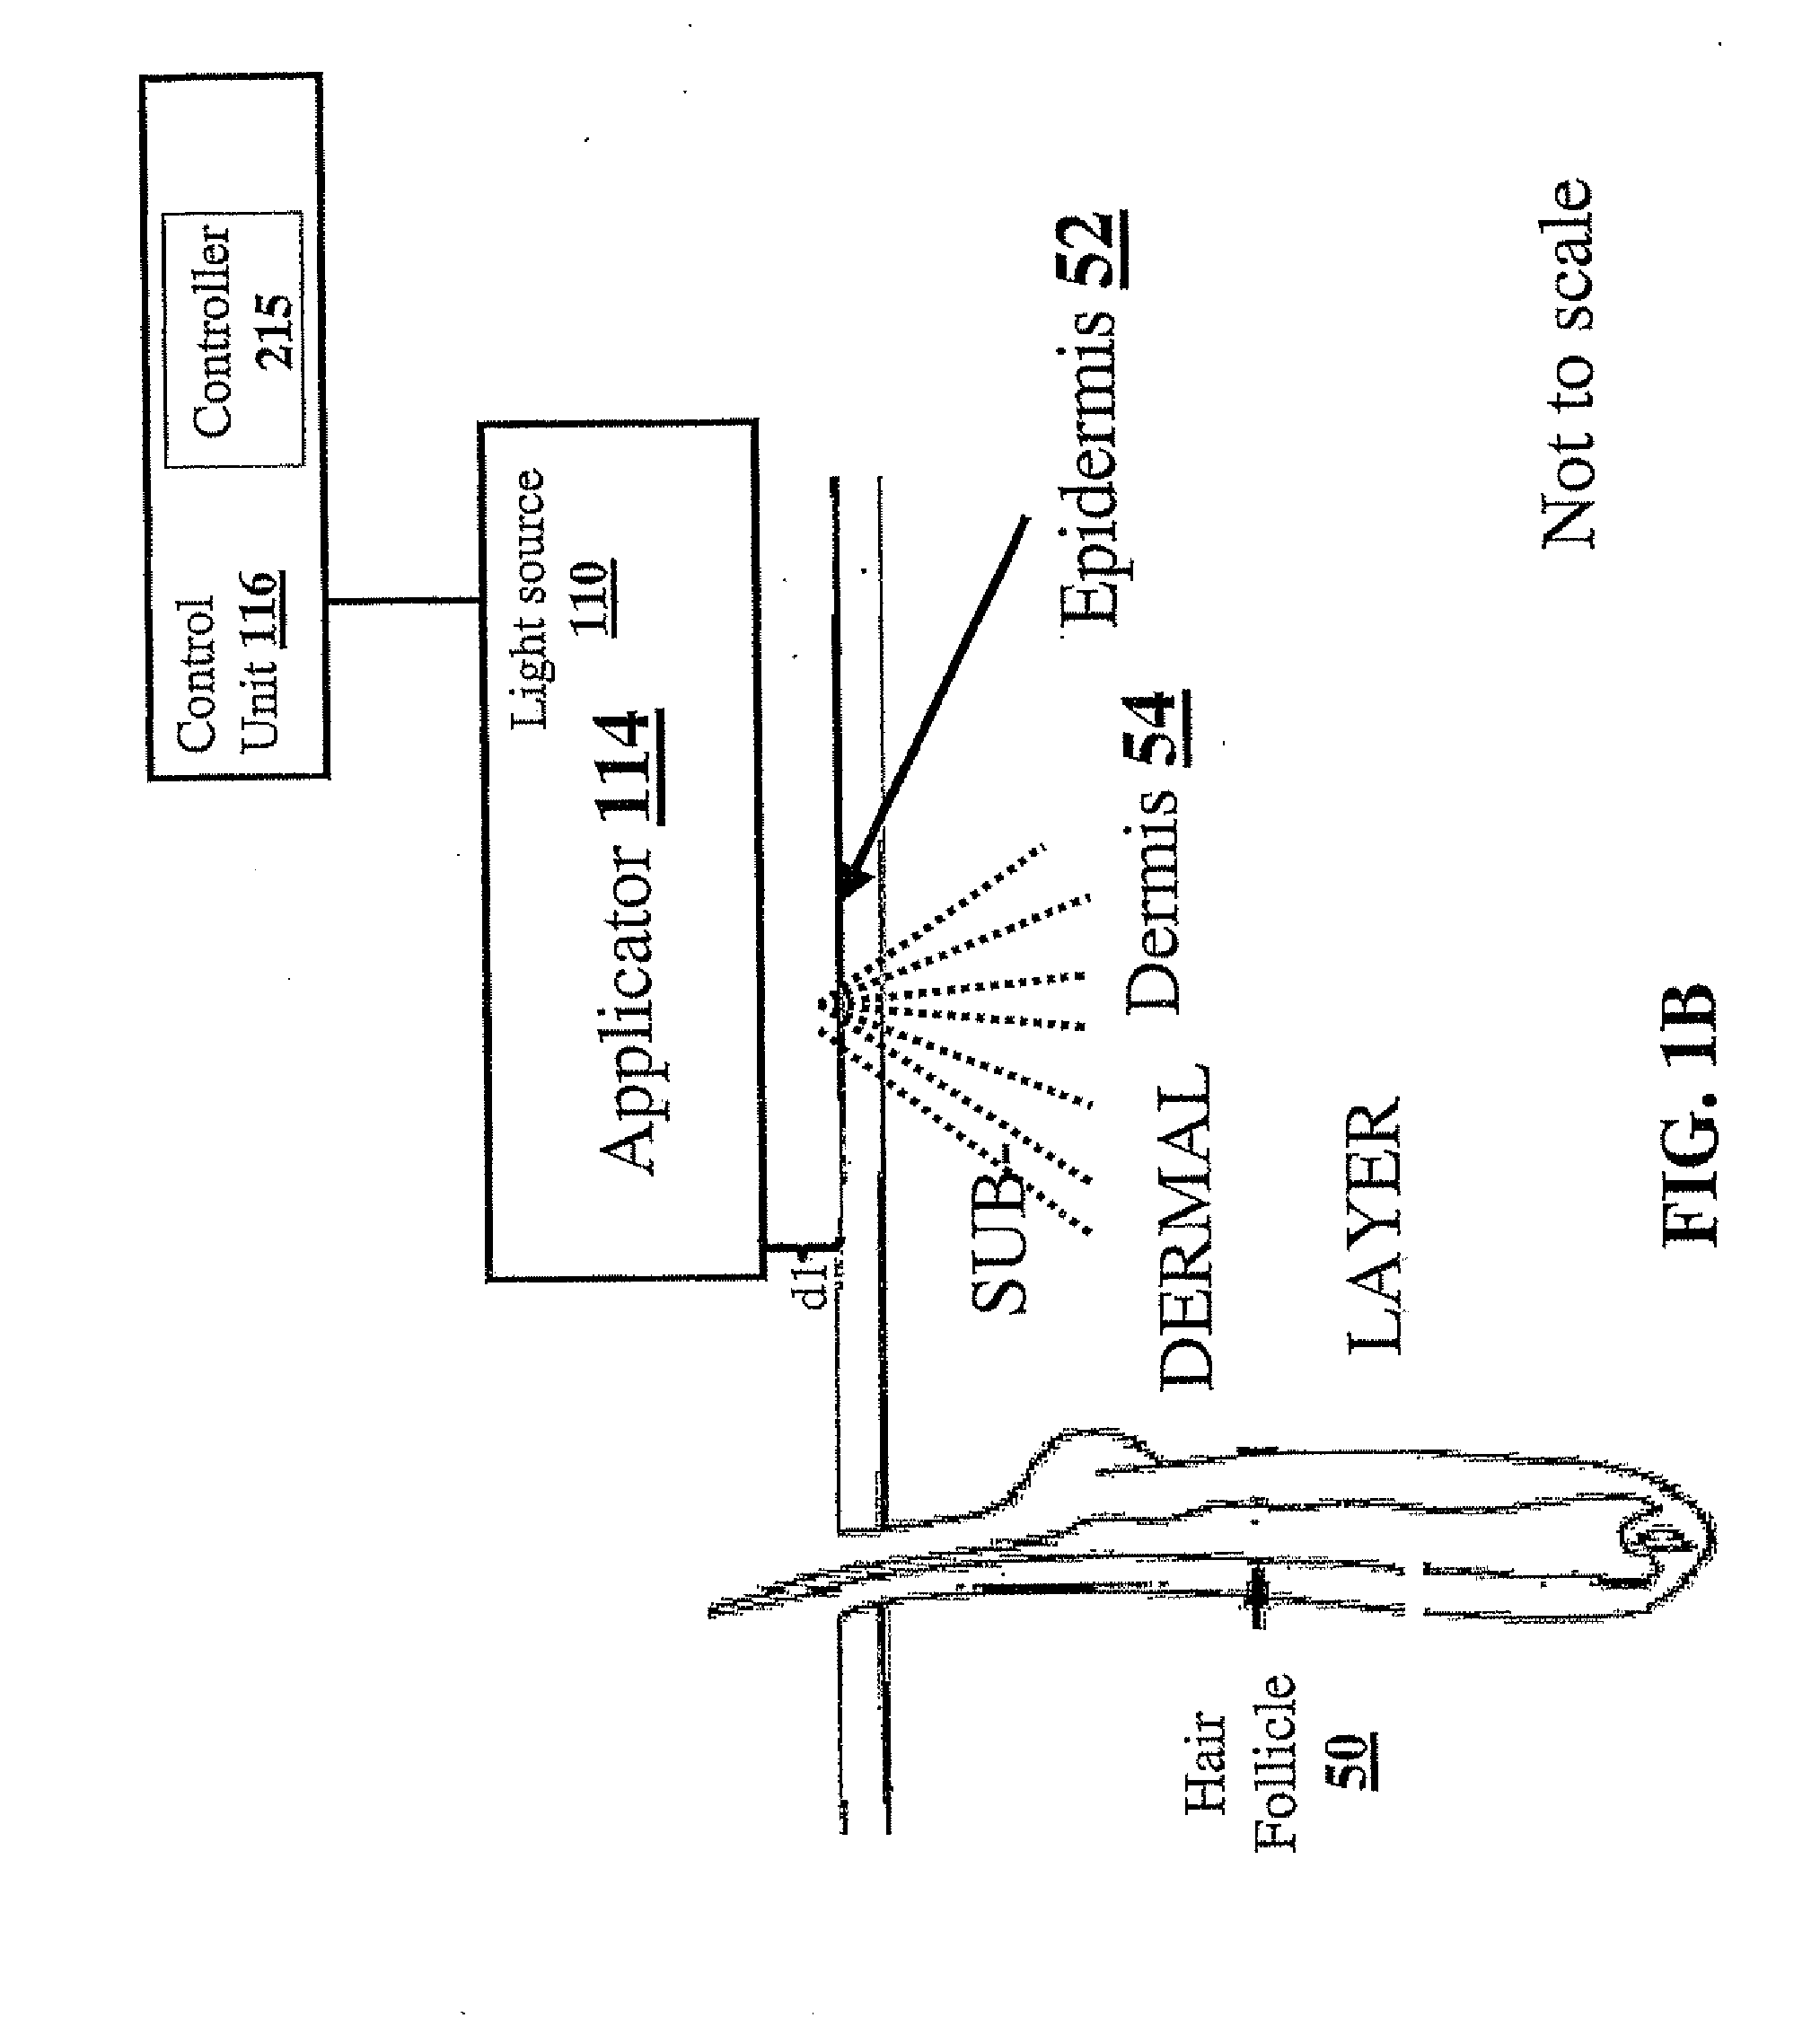 Method and apparatus for light-based hair removal using incoherent light pulses